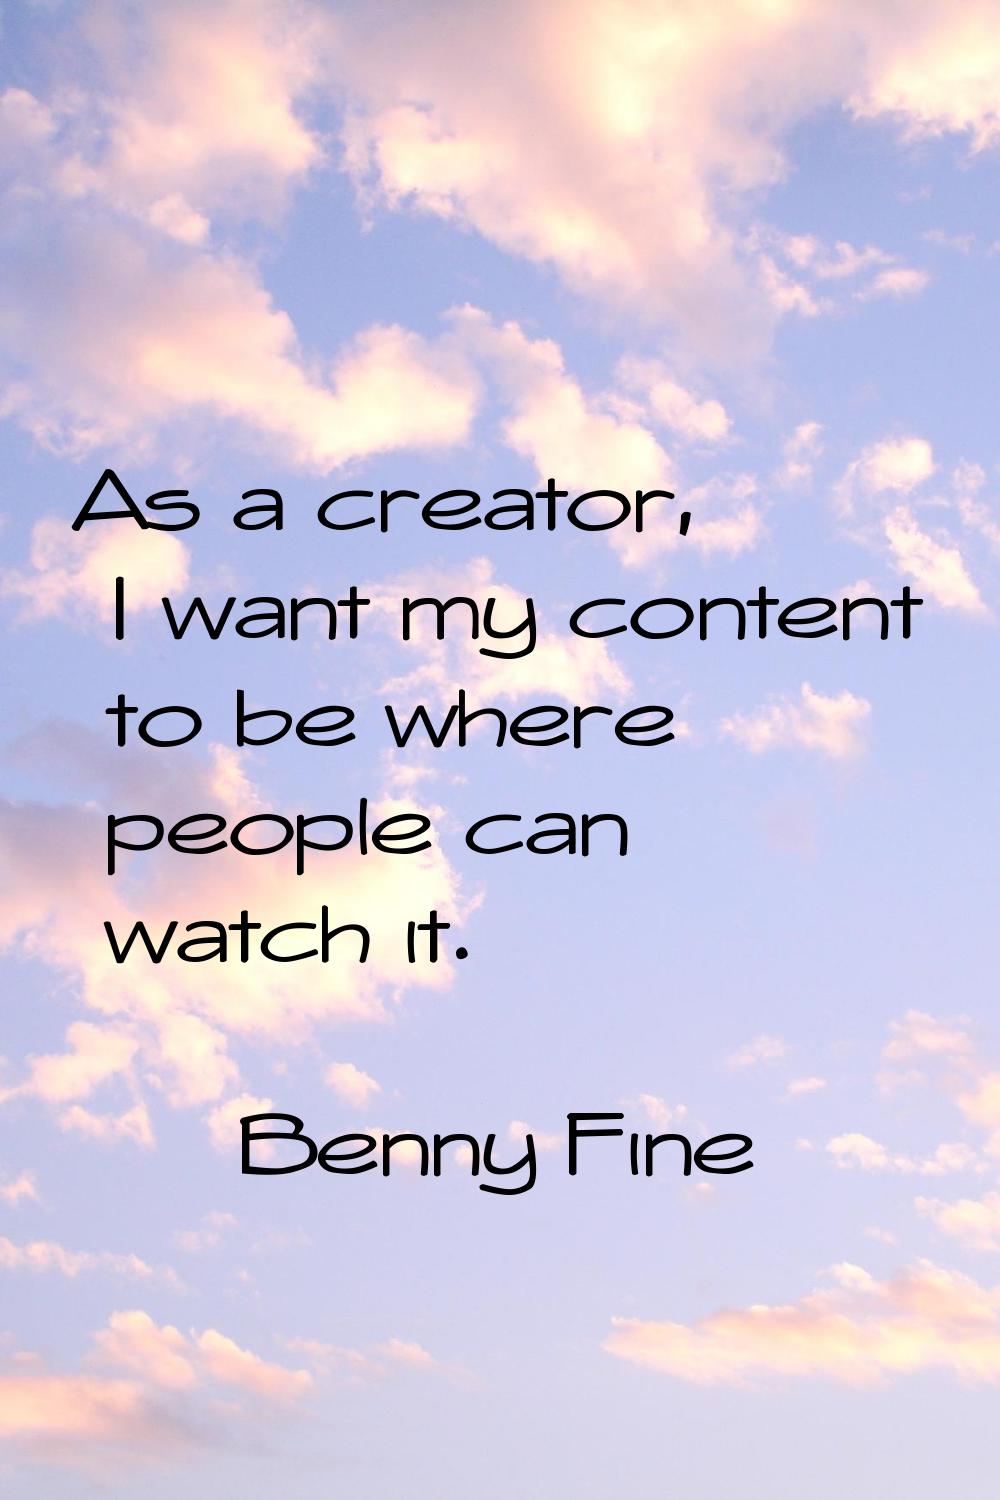 As a creator, I want my content to be where people can watch it.